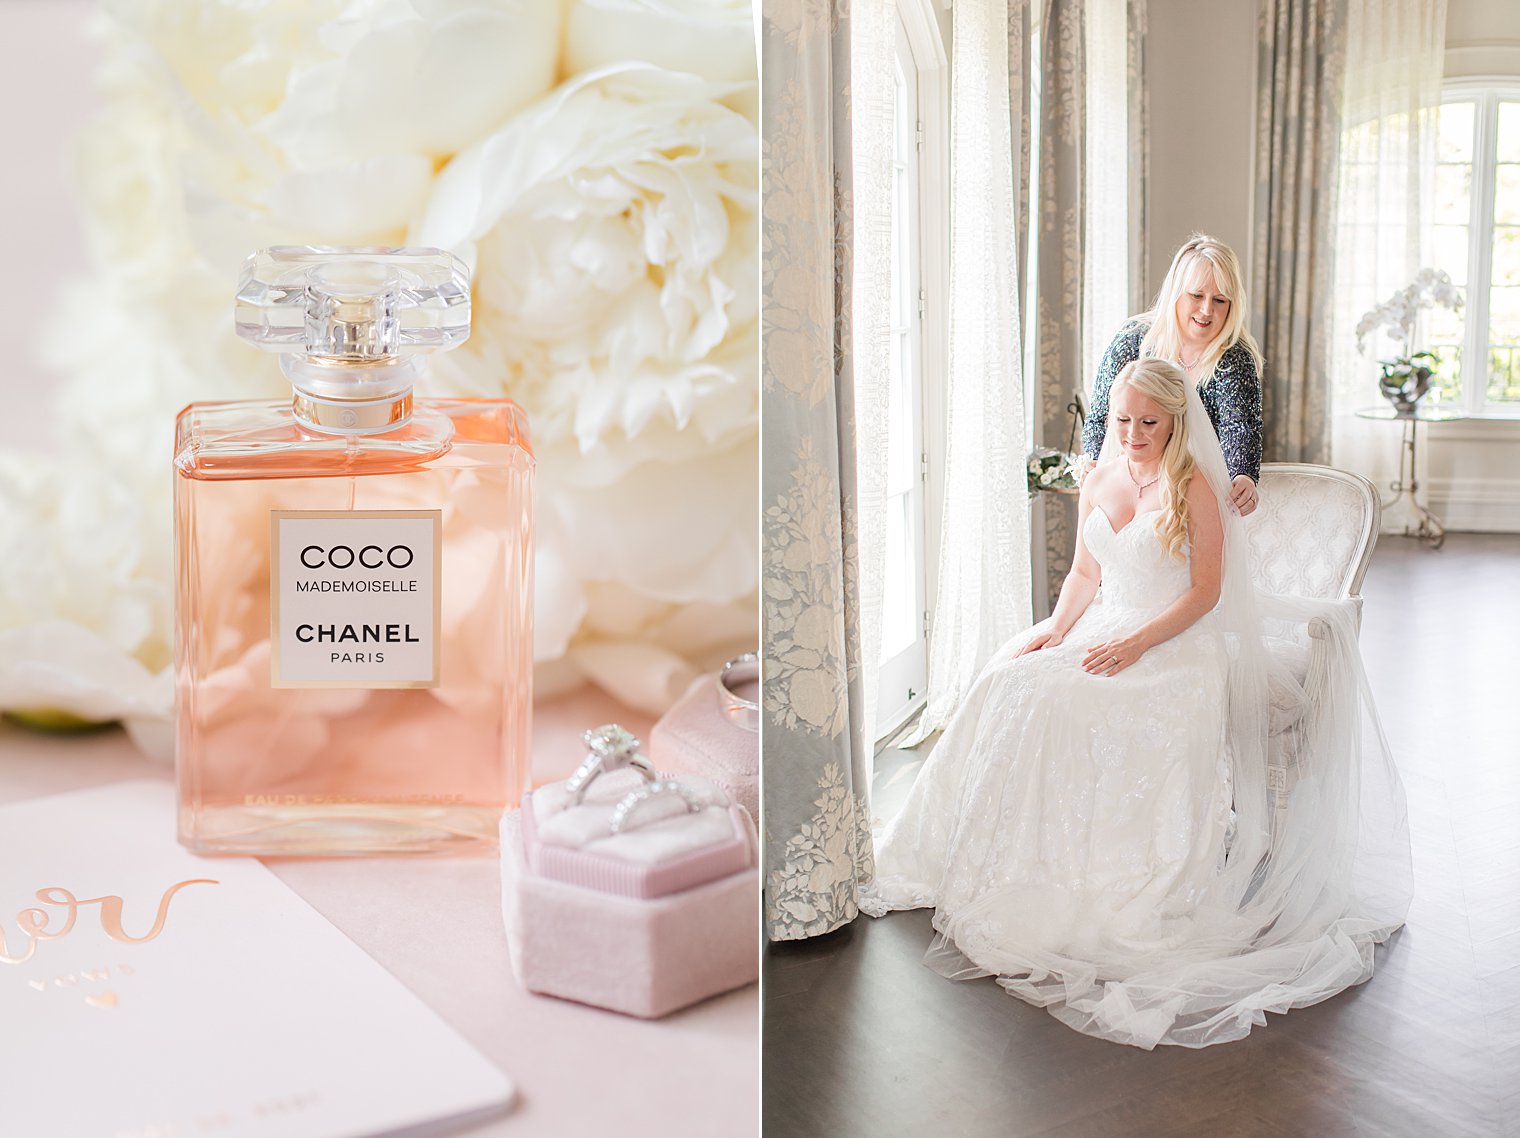 bride's bottle of Coco Chanel perfume on wedding day